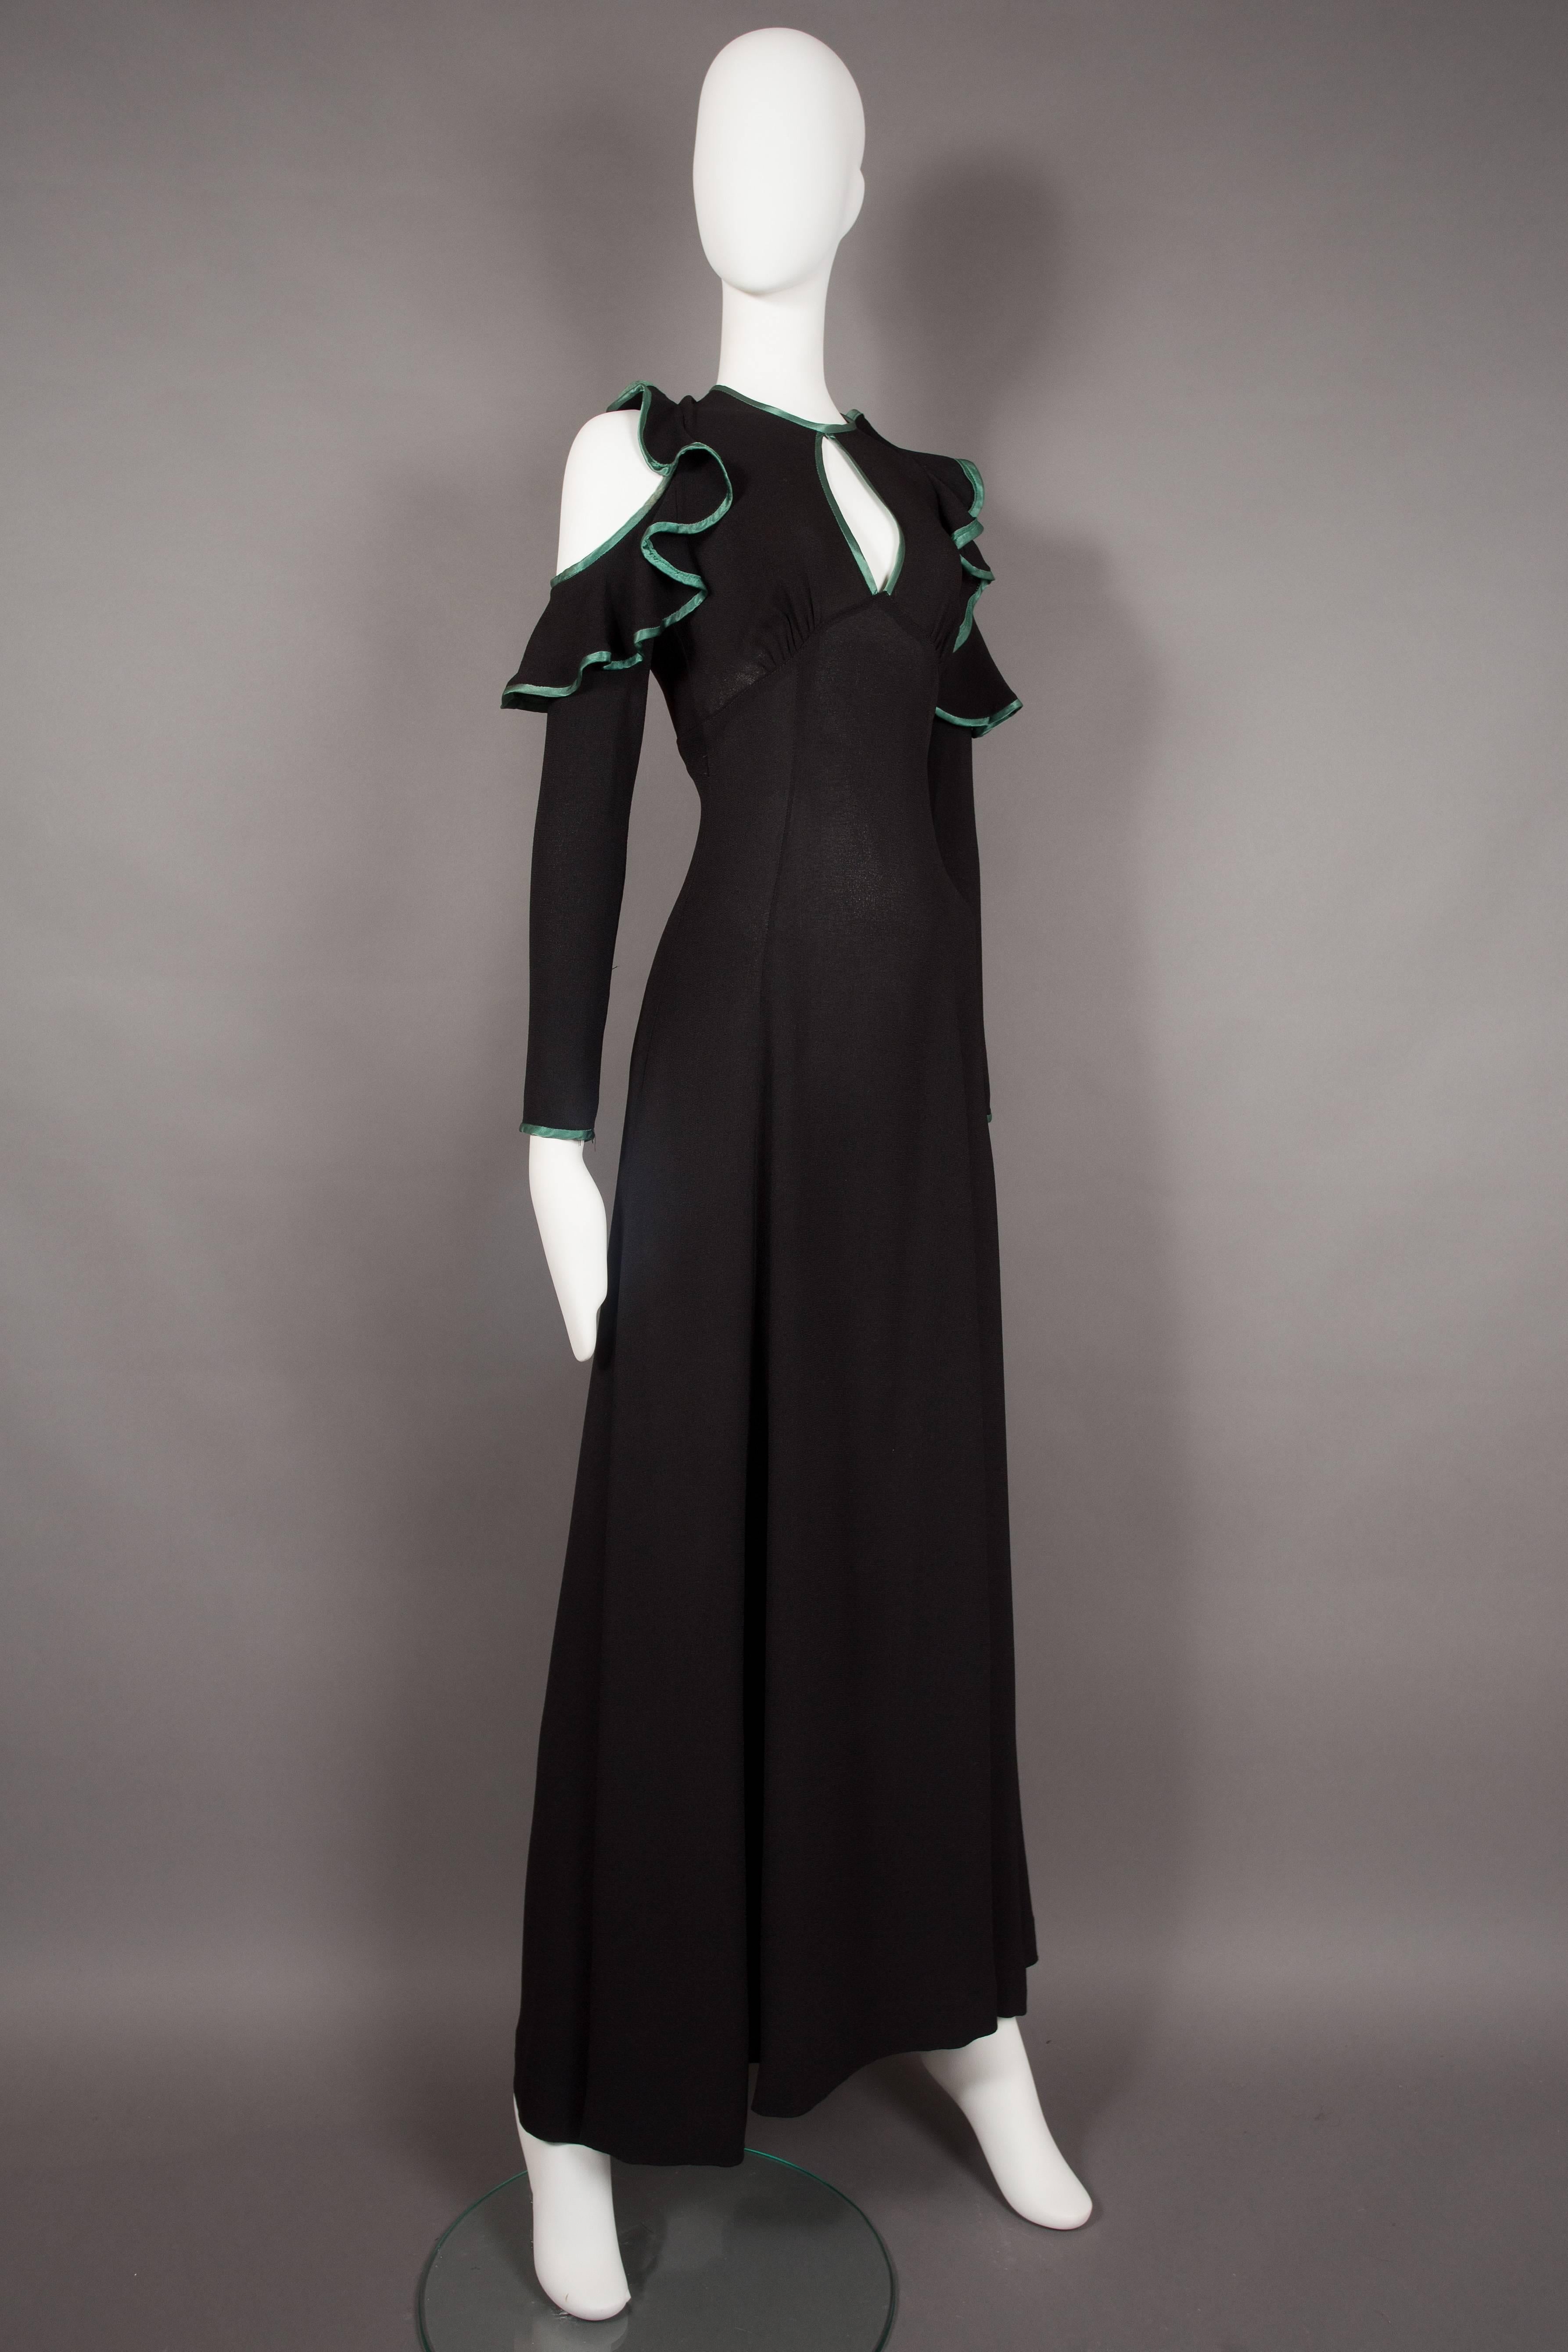 An Ossie Clark black moss crepe evening dress, circa 1968. Cold shoulder design with ruffles, green satin trim throughout, peek-a-boo cleavage, open back, bow fastening and metal zip closure on waist. 